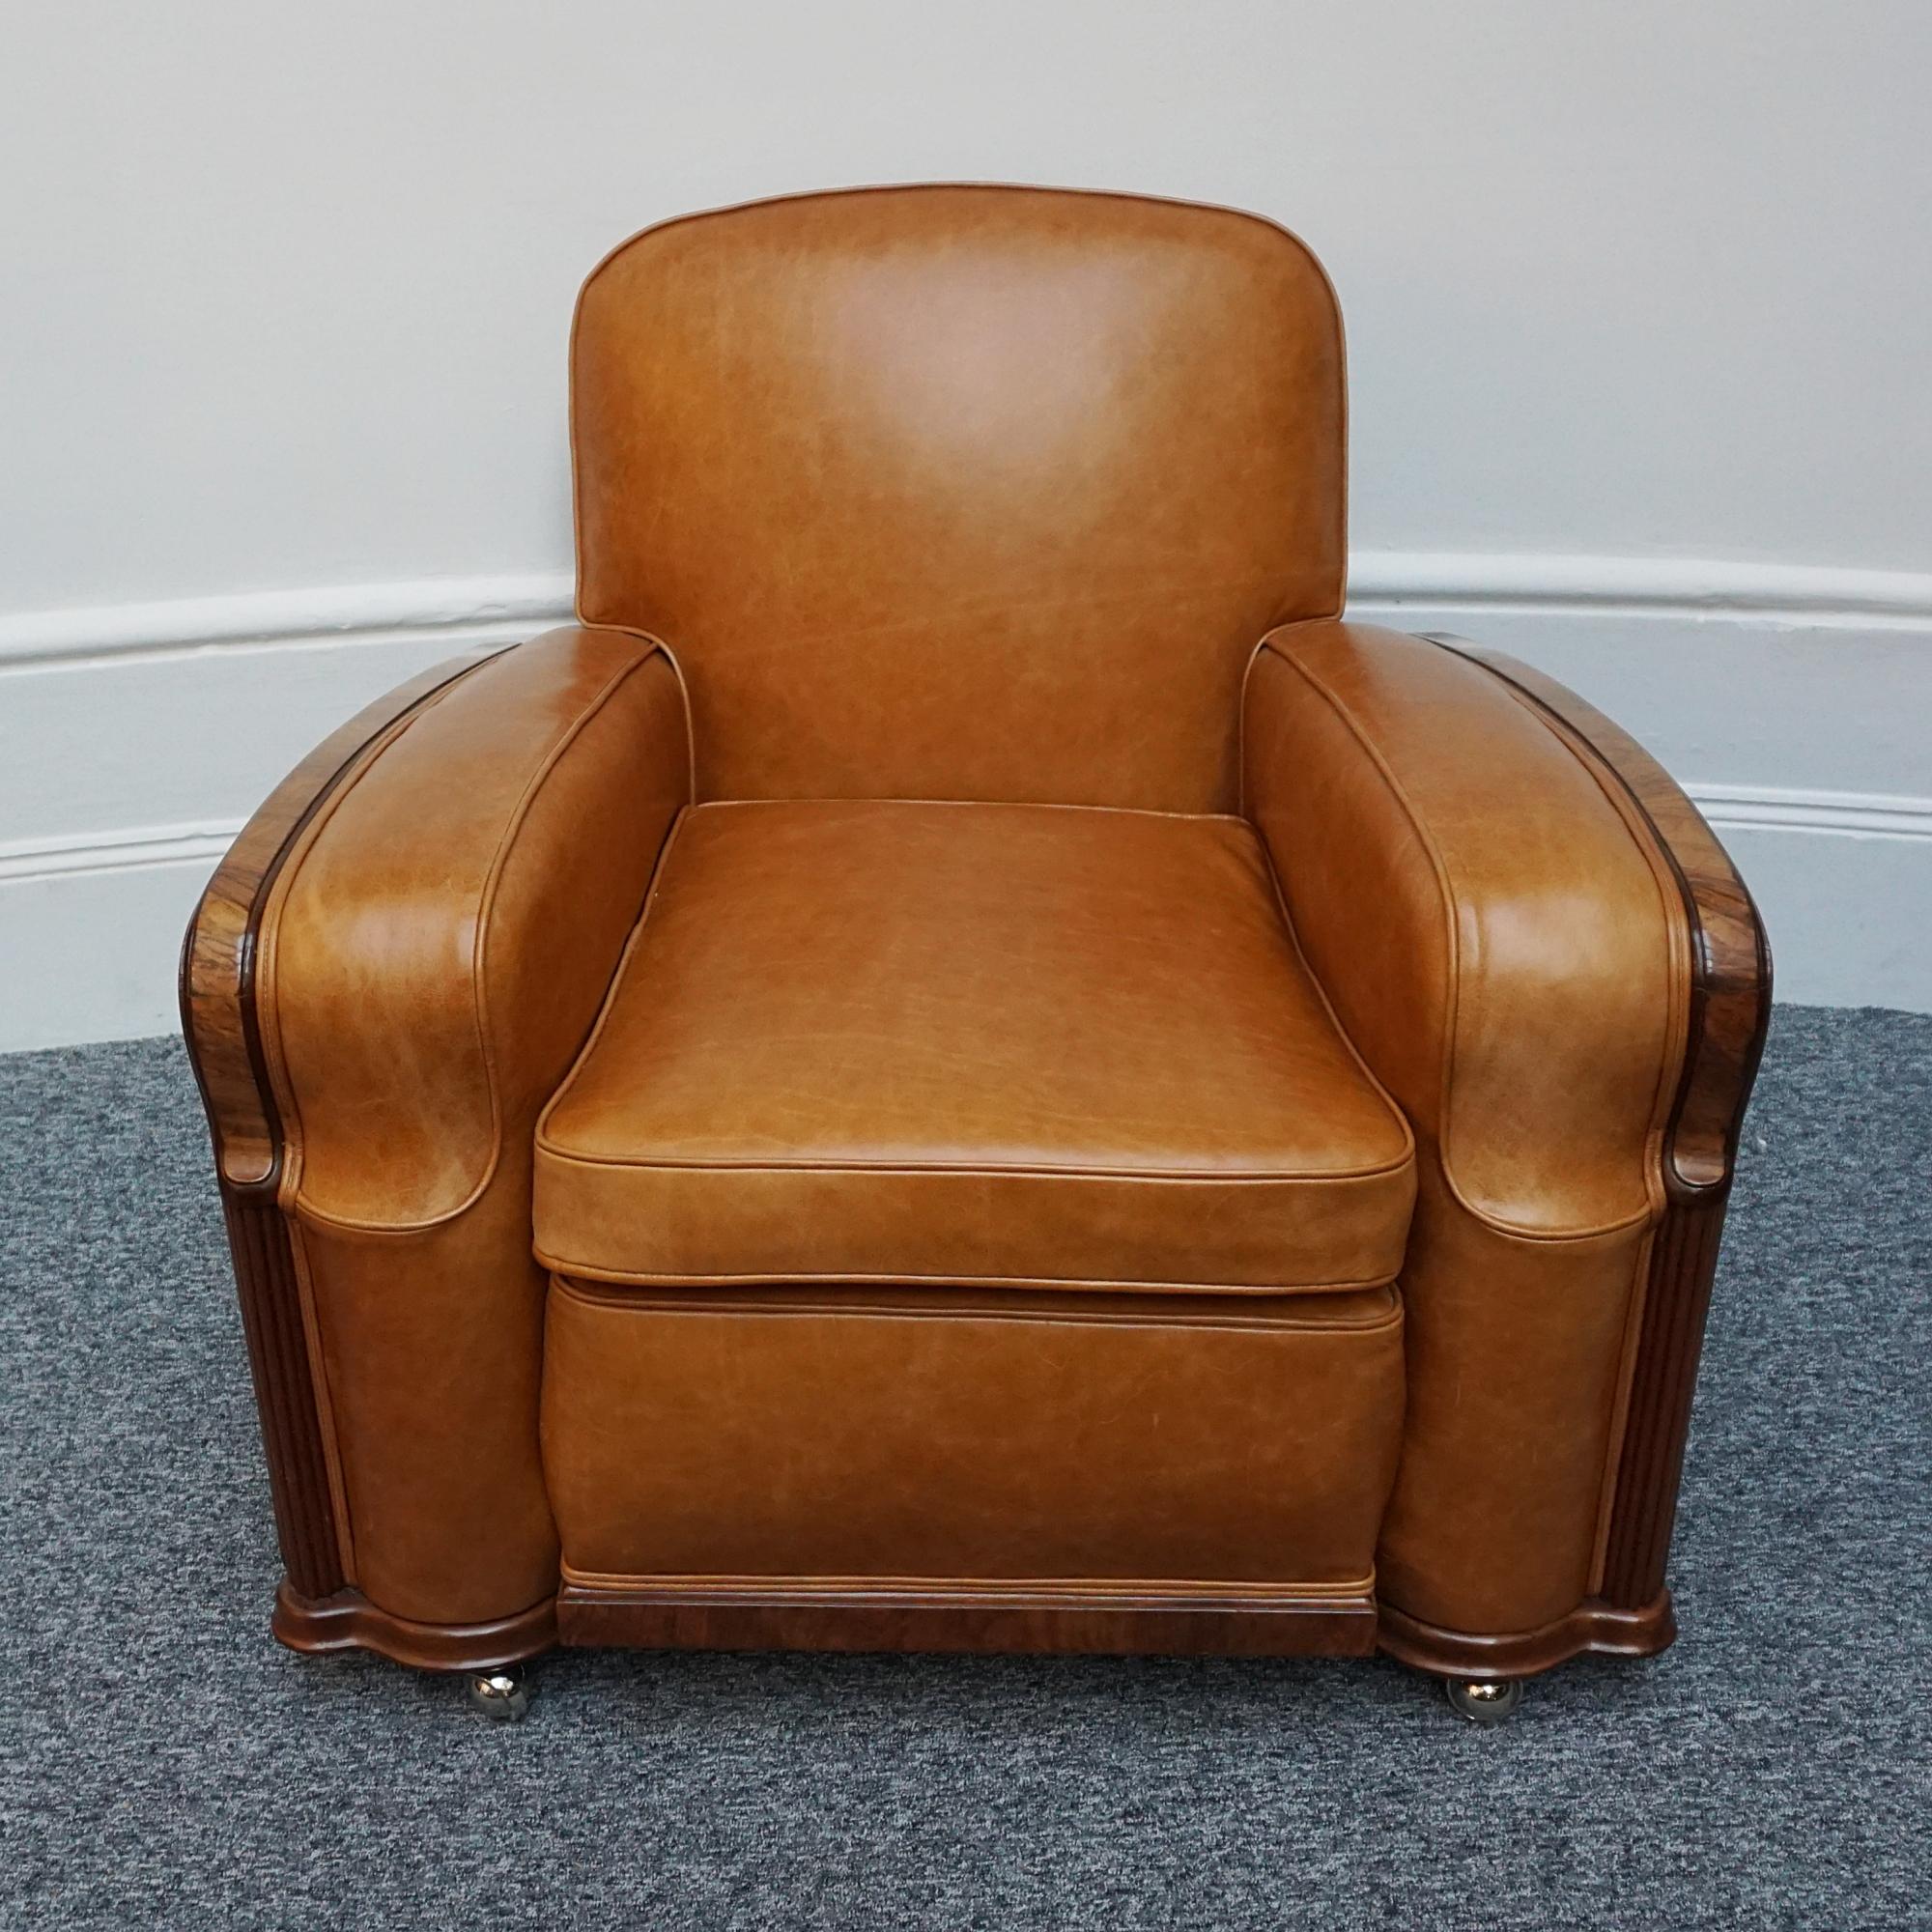 A pair of Art Deco Club Chairs. Shaped burr and figured walnut to the sides and the back. Burr walnut and fluted banding. Veneered throughout. Re-upholstered in brown leather. 

Dimensions: H 79cm W 92cm D 85cm Seat H 48cm W 50cm D 61cm

Origin: